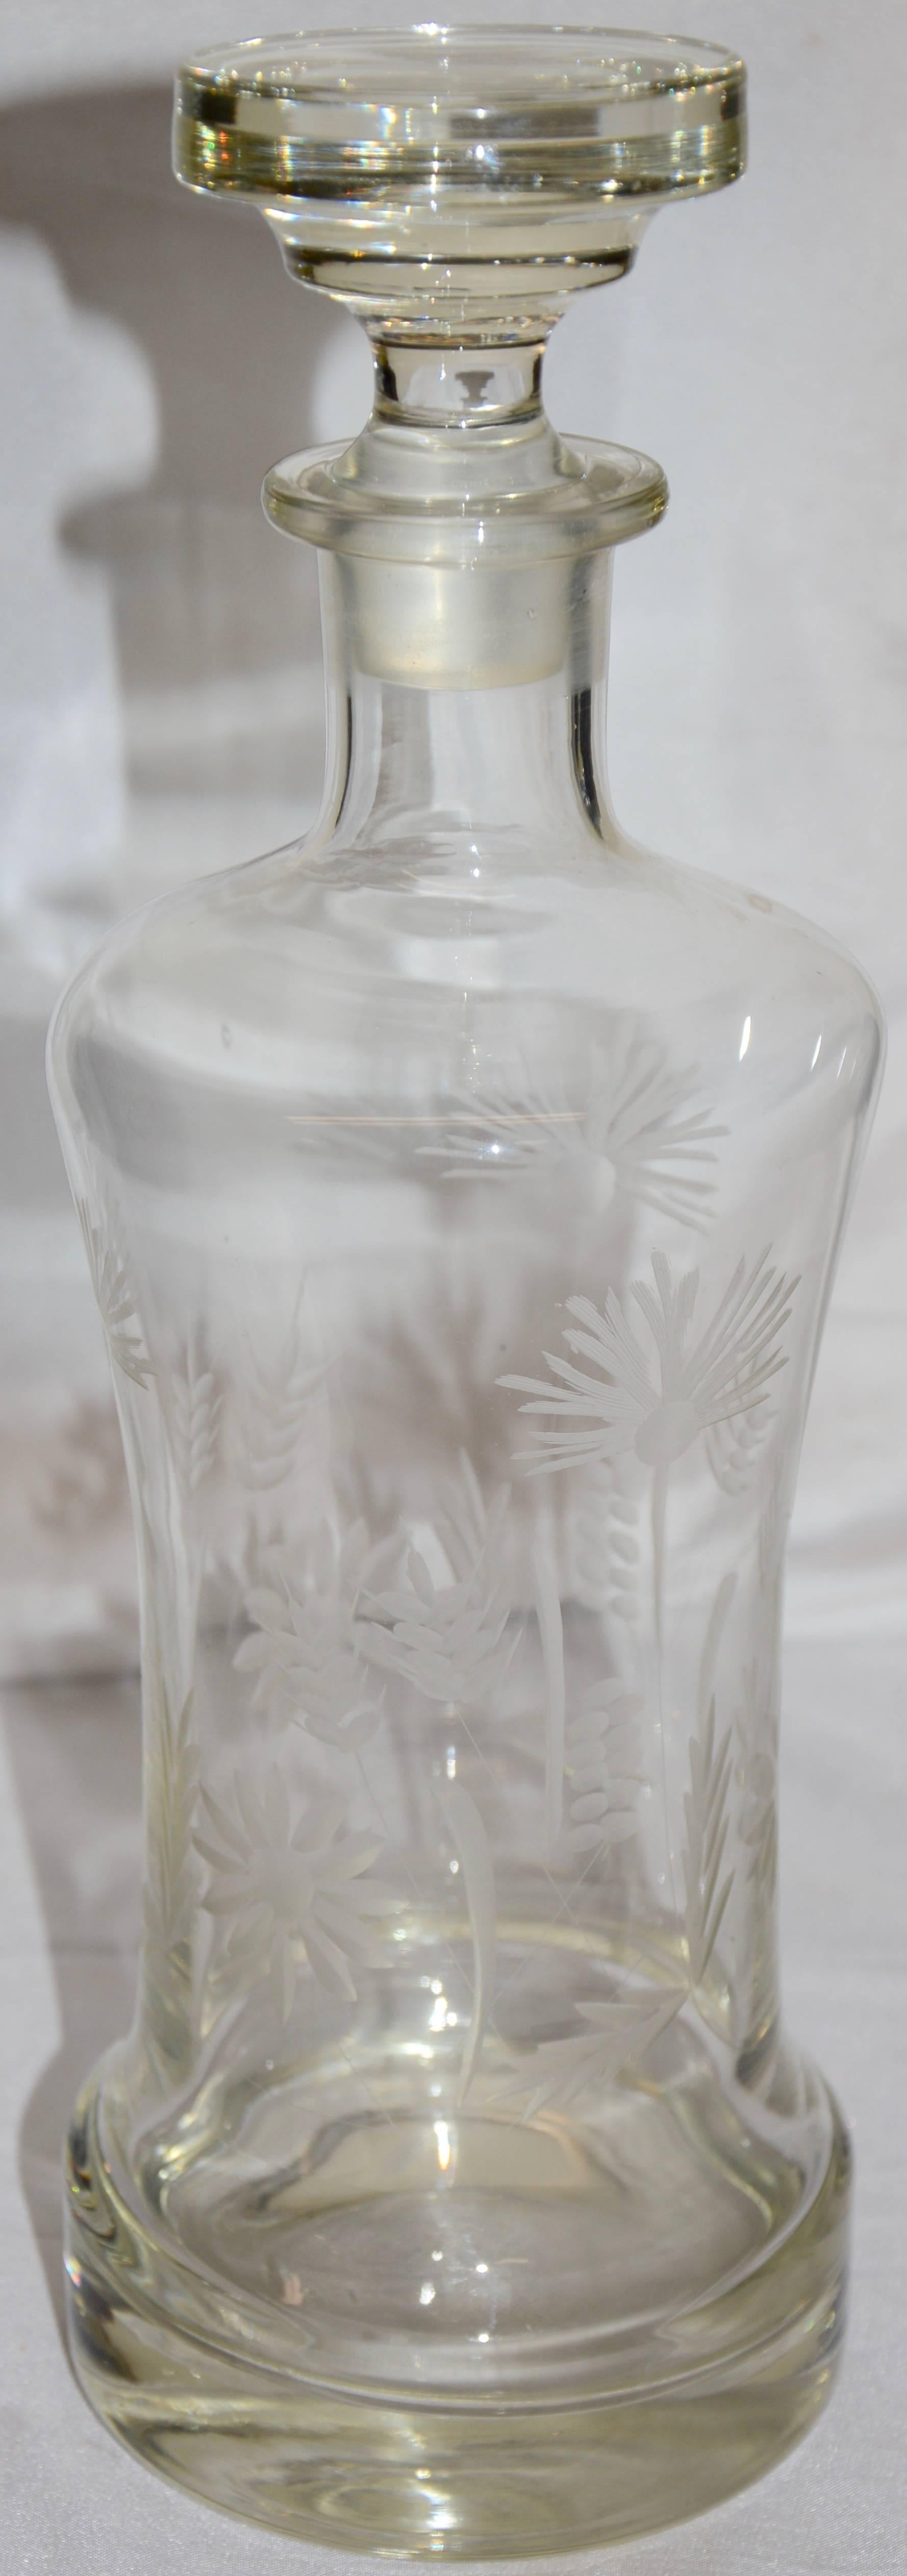 etched decanter